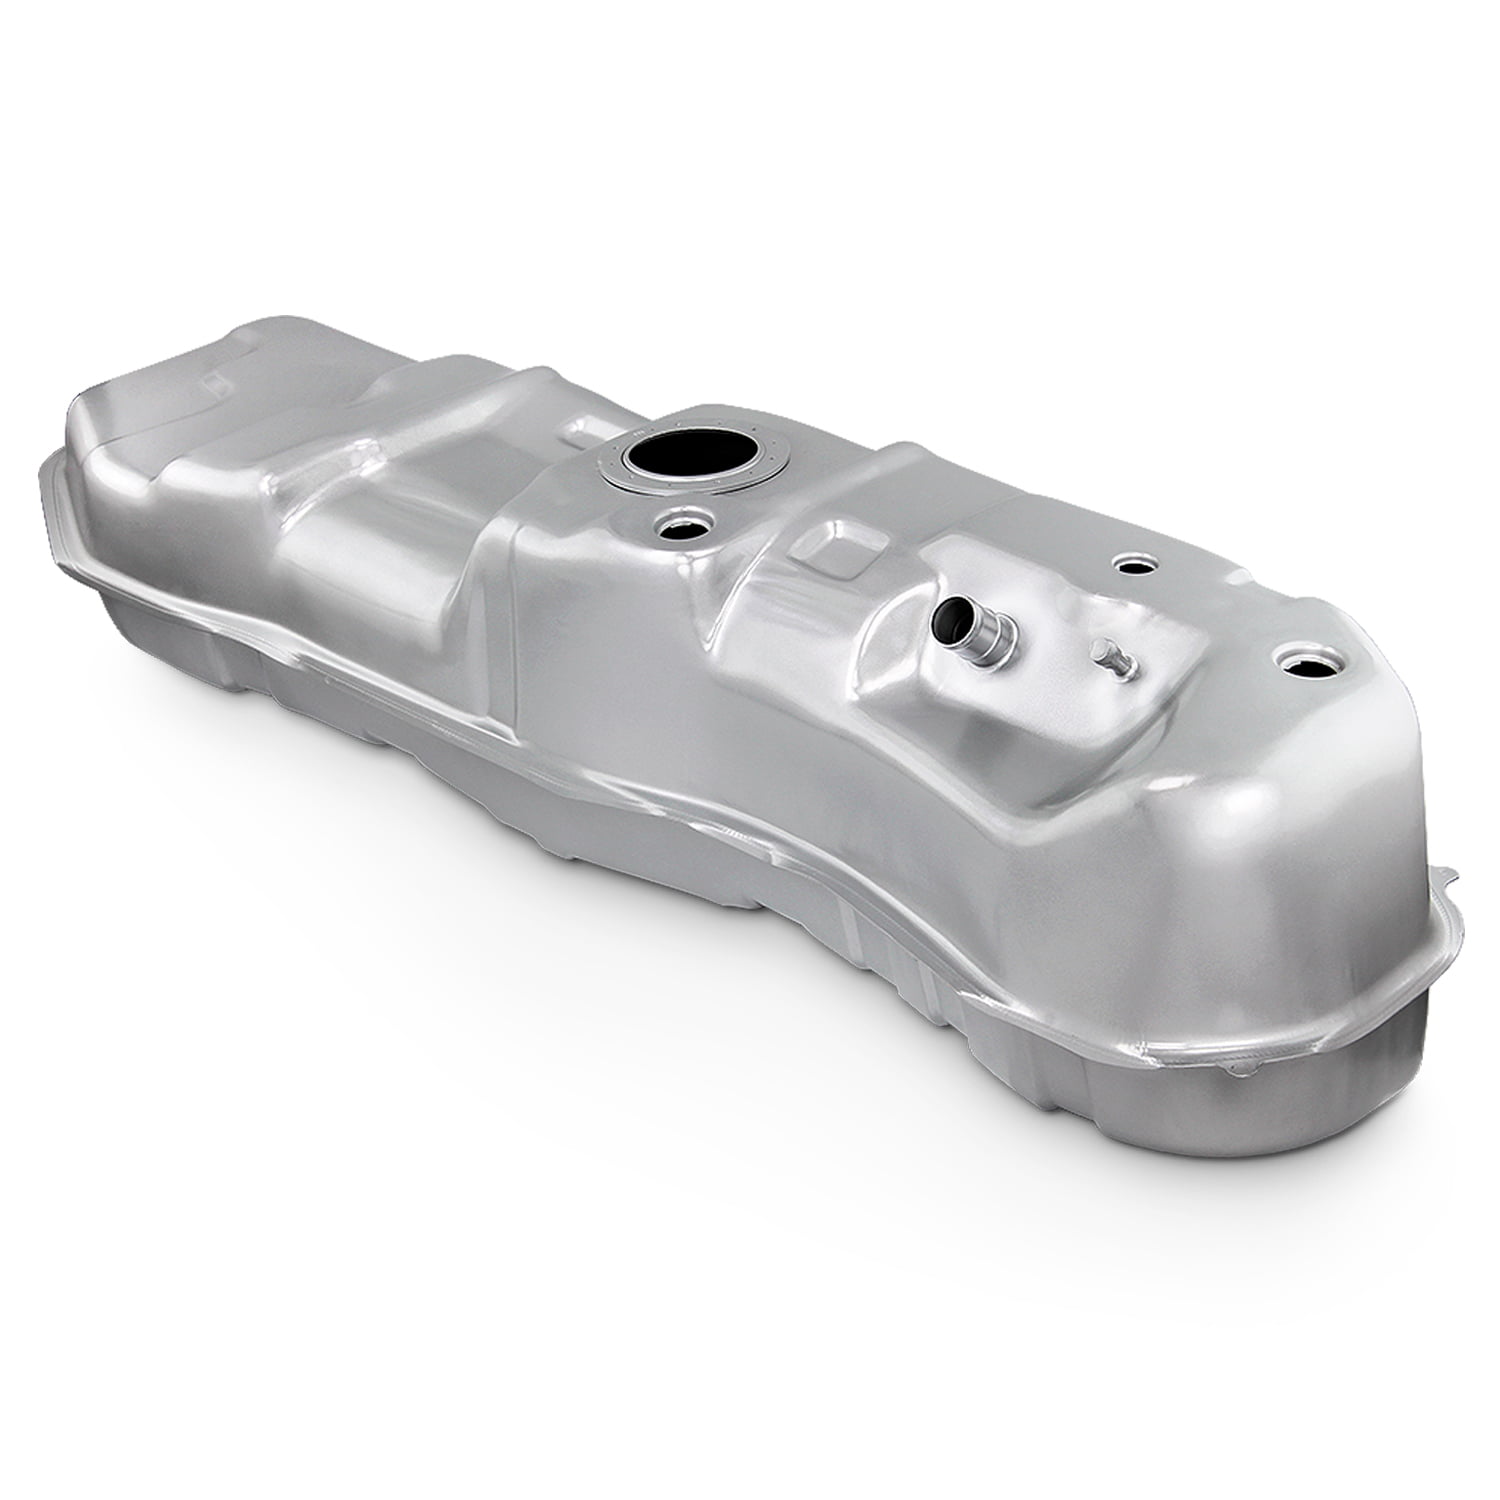 For 1999 F250 20002003 F150 2004 F150 Heritage Fuel Gas Tank 24.5 Gal